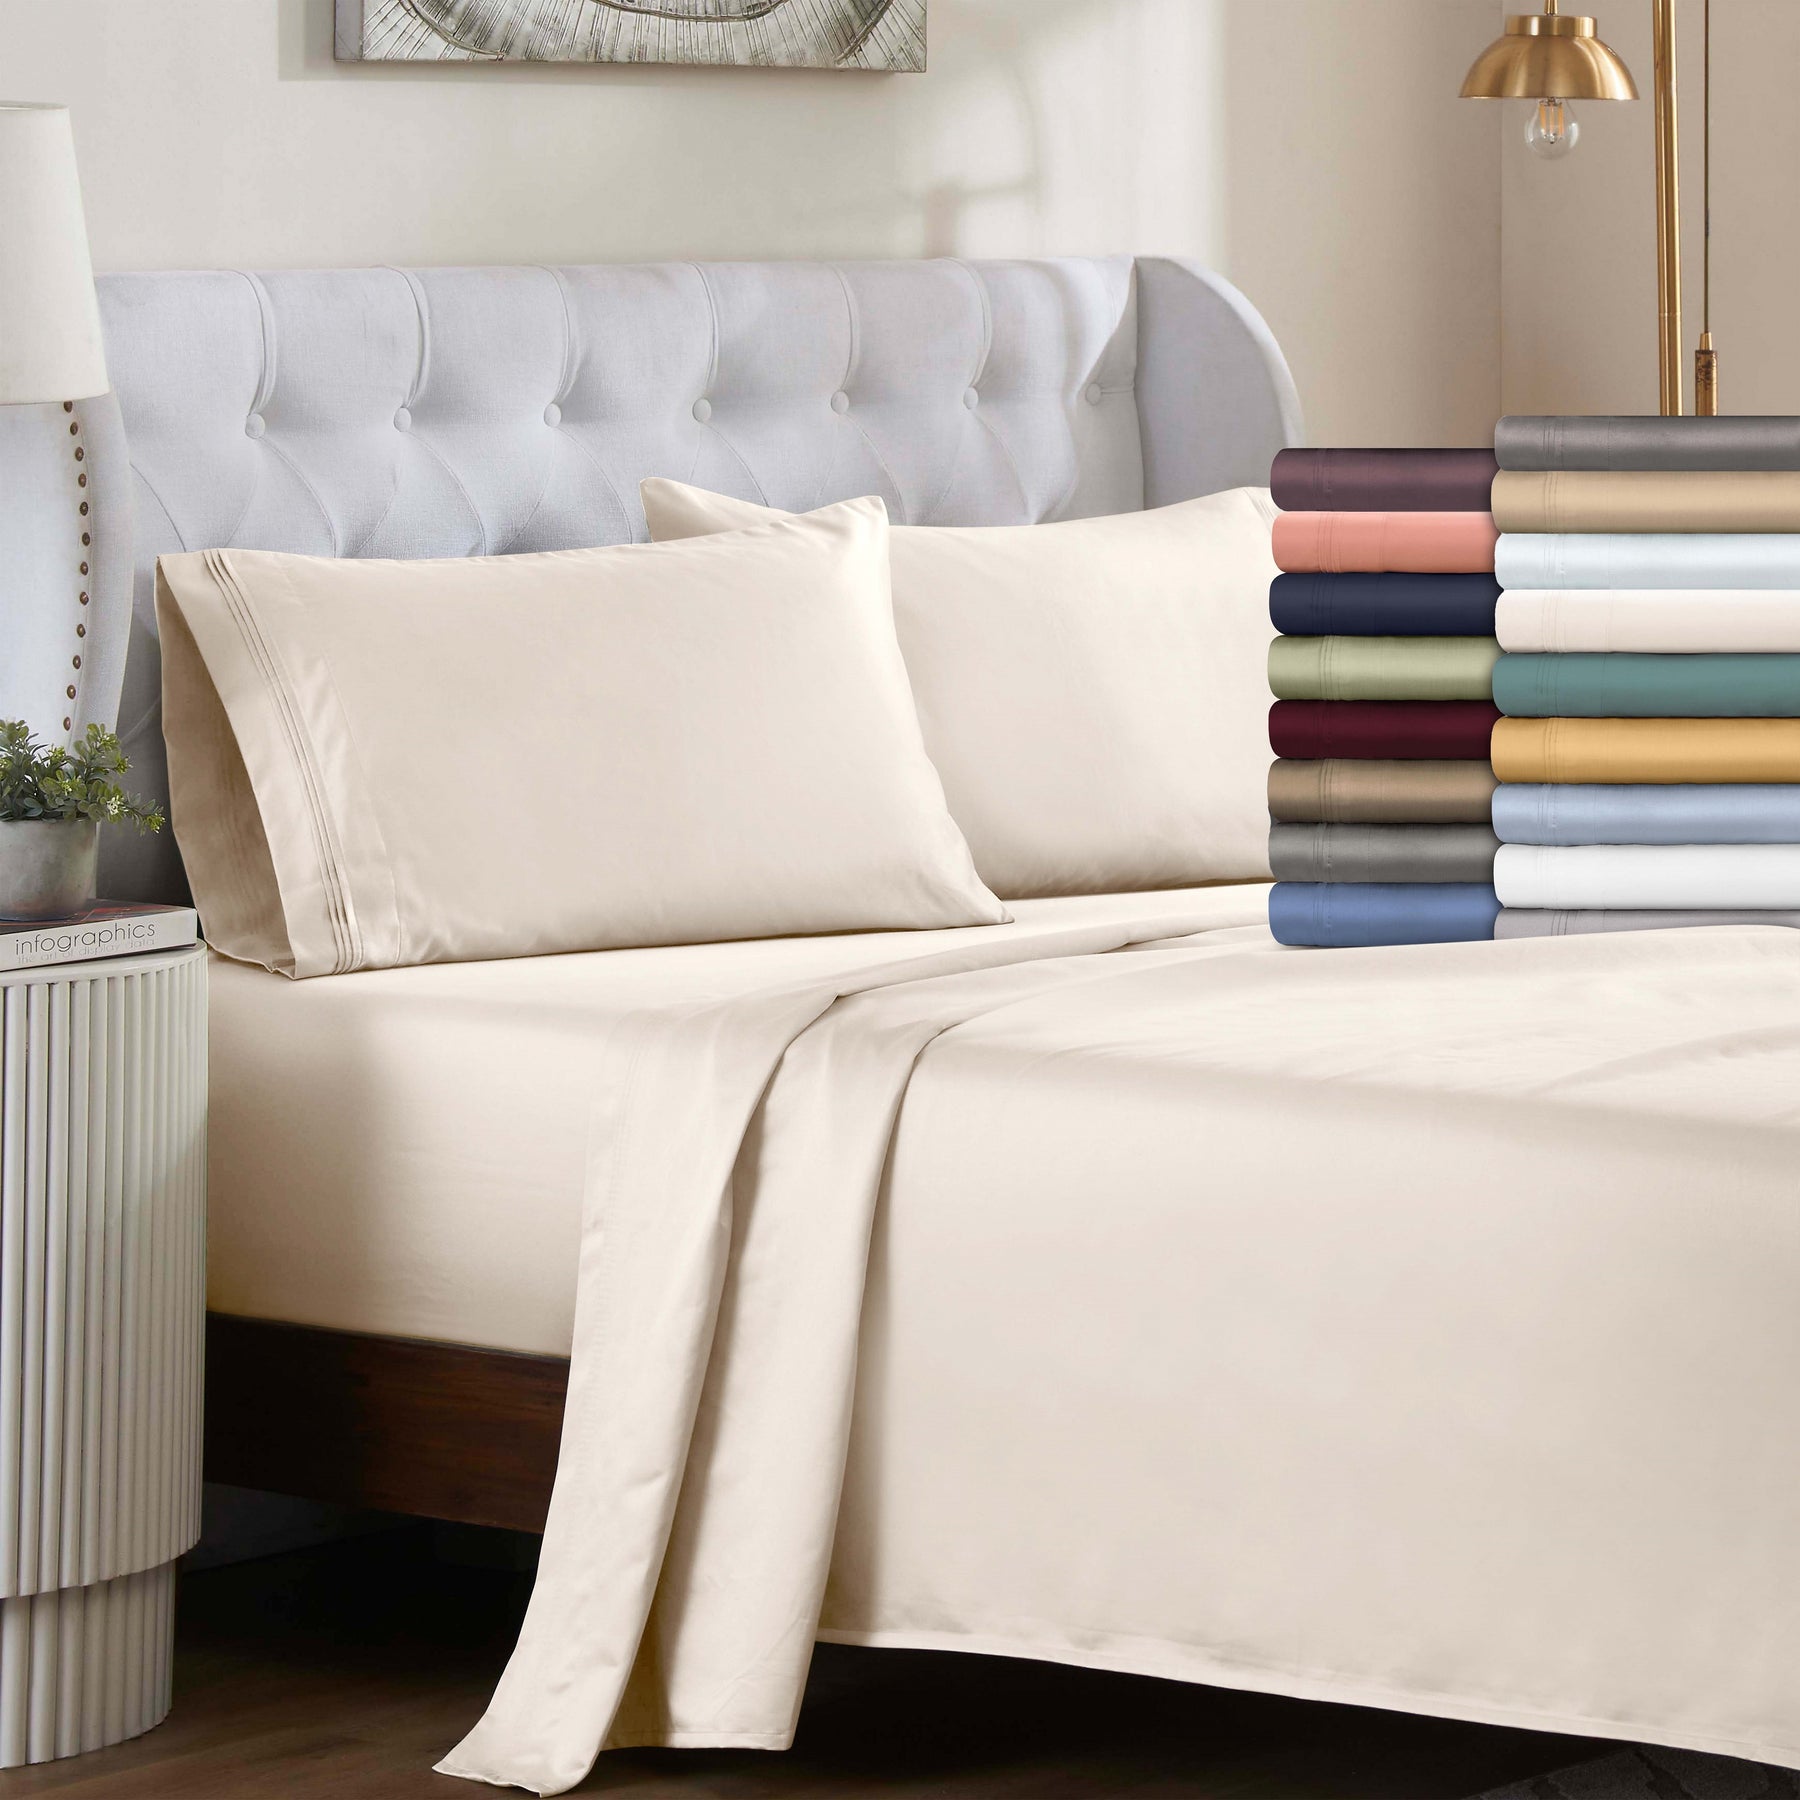 Luxury 1000 Thread Count Bed Sheets Set - 100% Cotton Sateen - Soft, Thick & Deep Pocket - Queen - Ivory